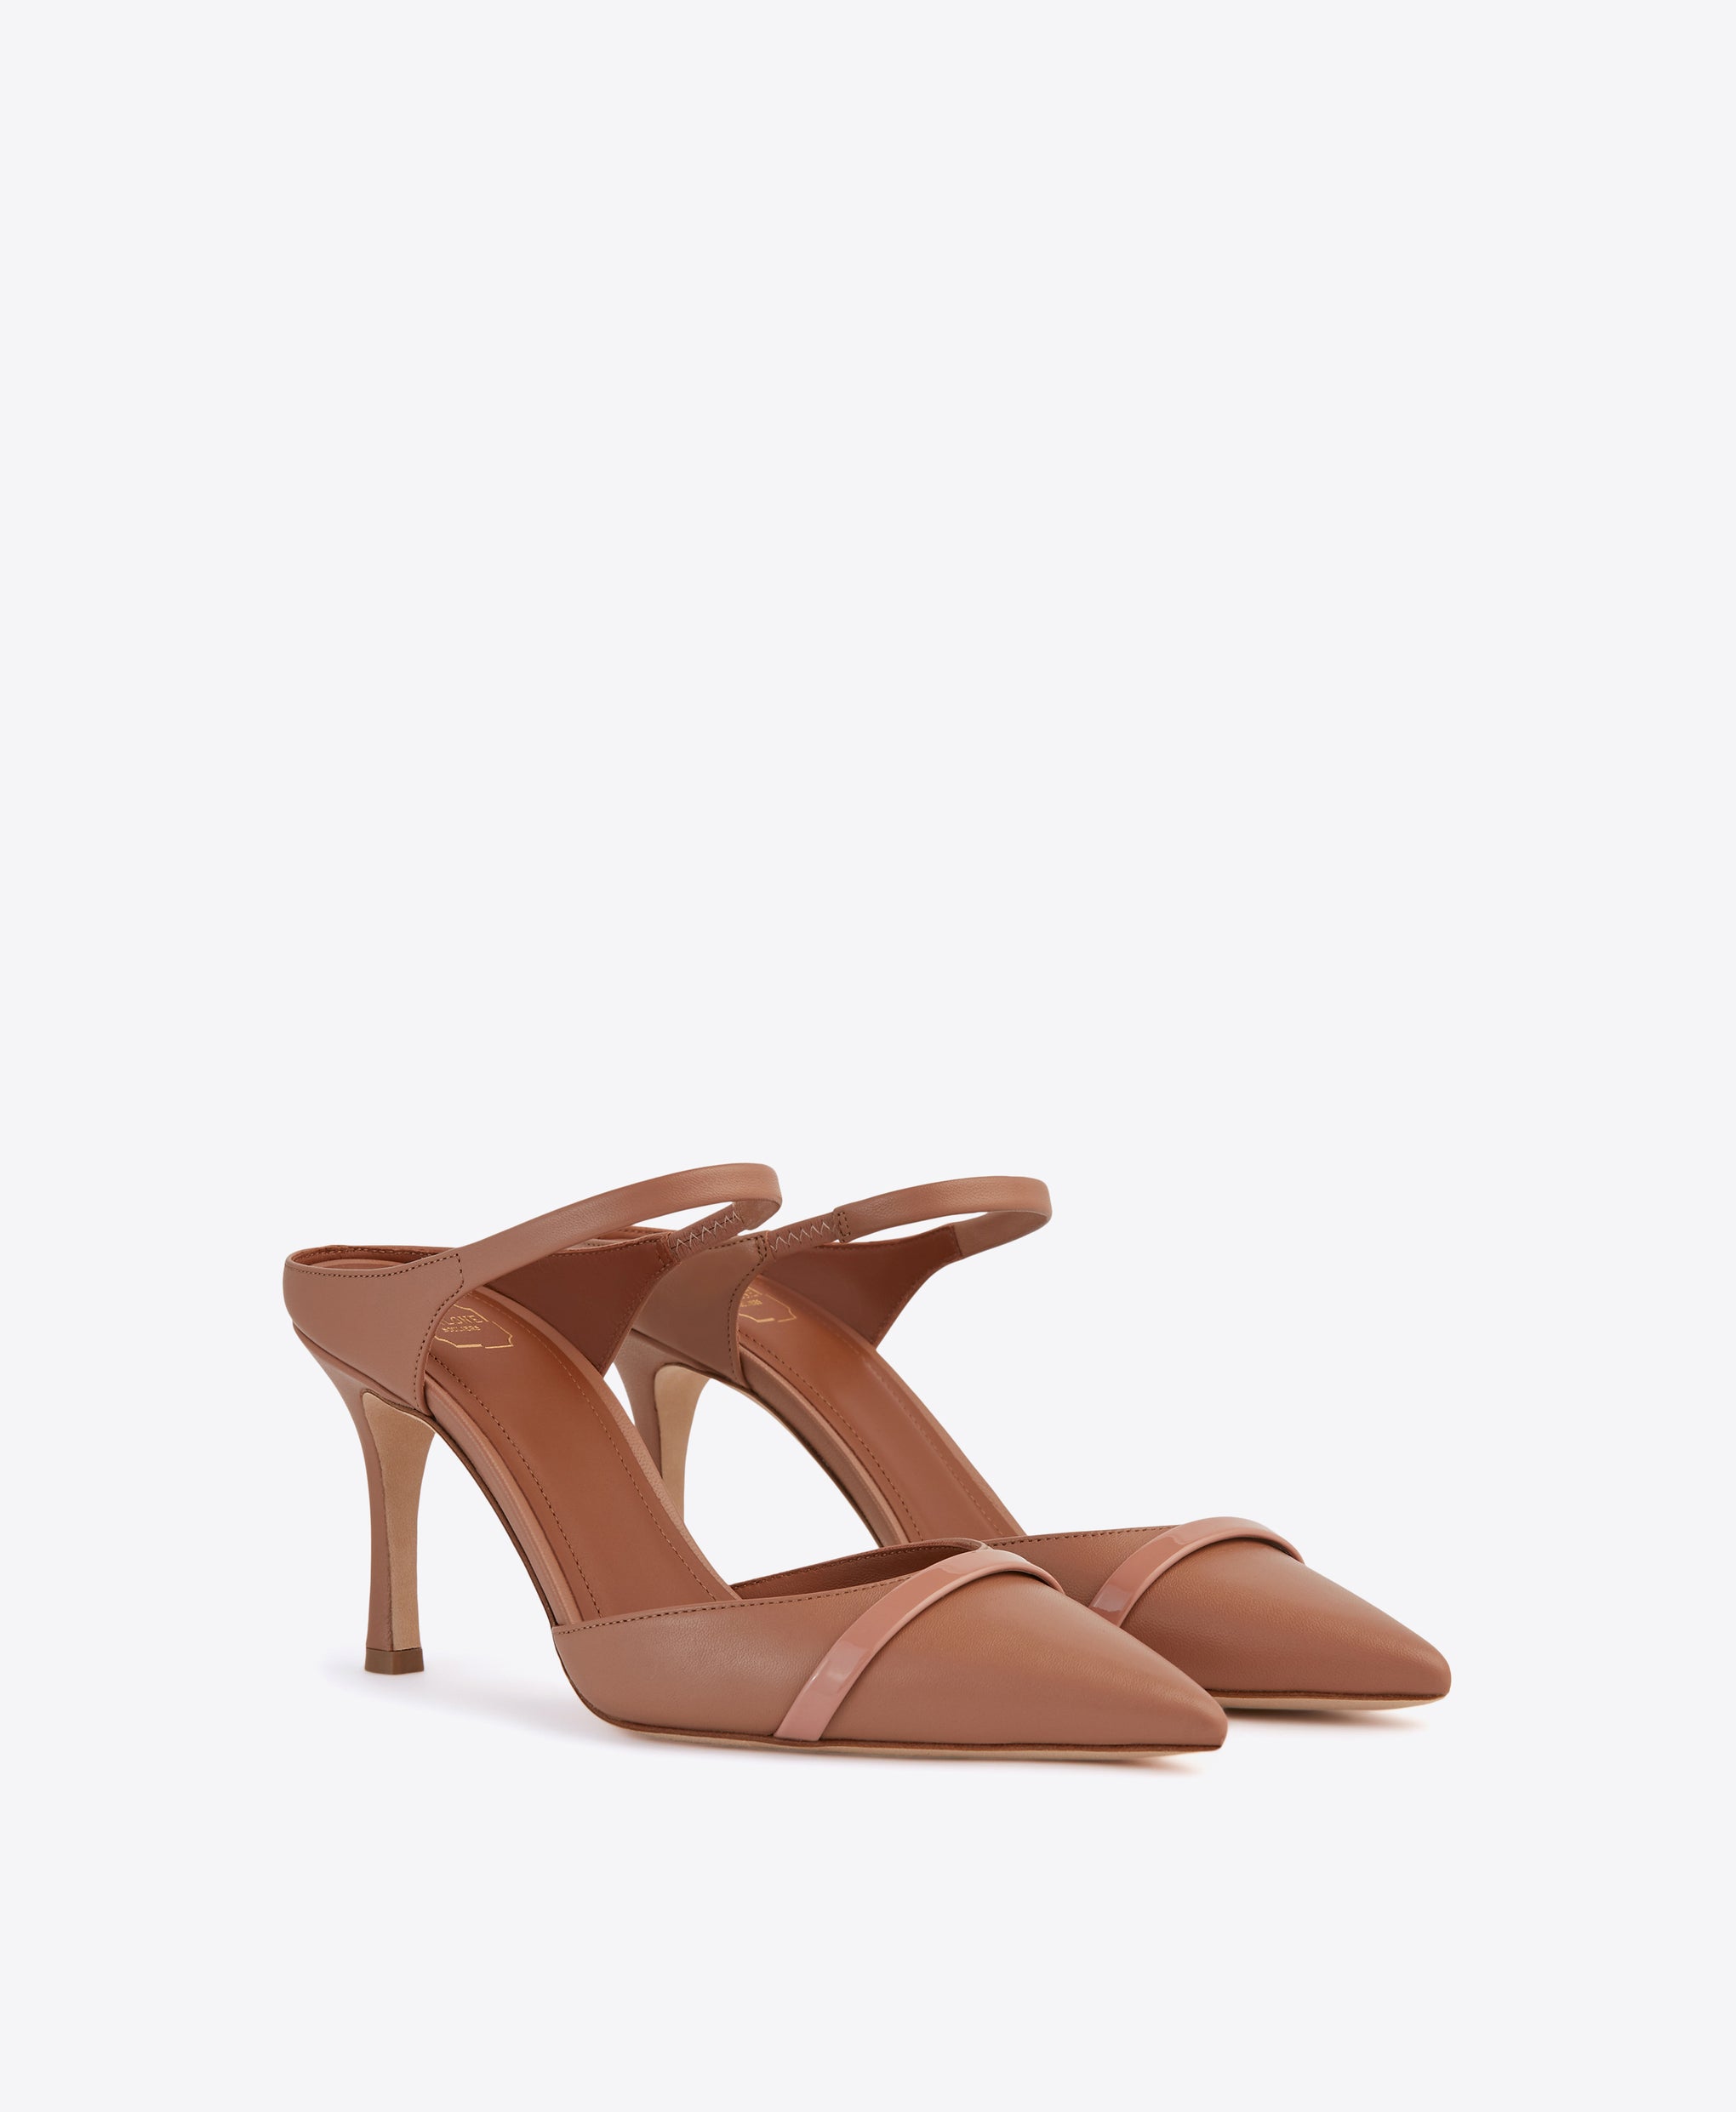 Women's Nude Leather Heeled Mules Malone Souliers